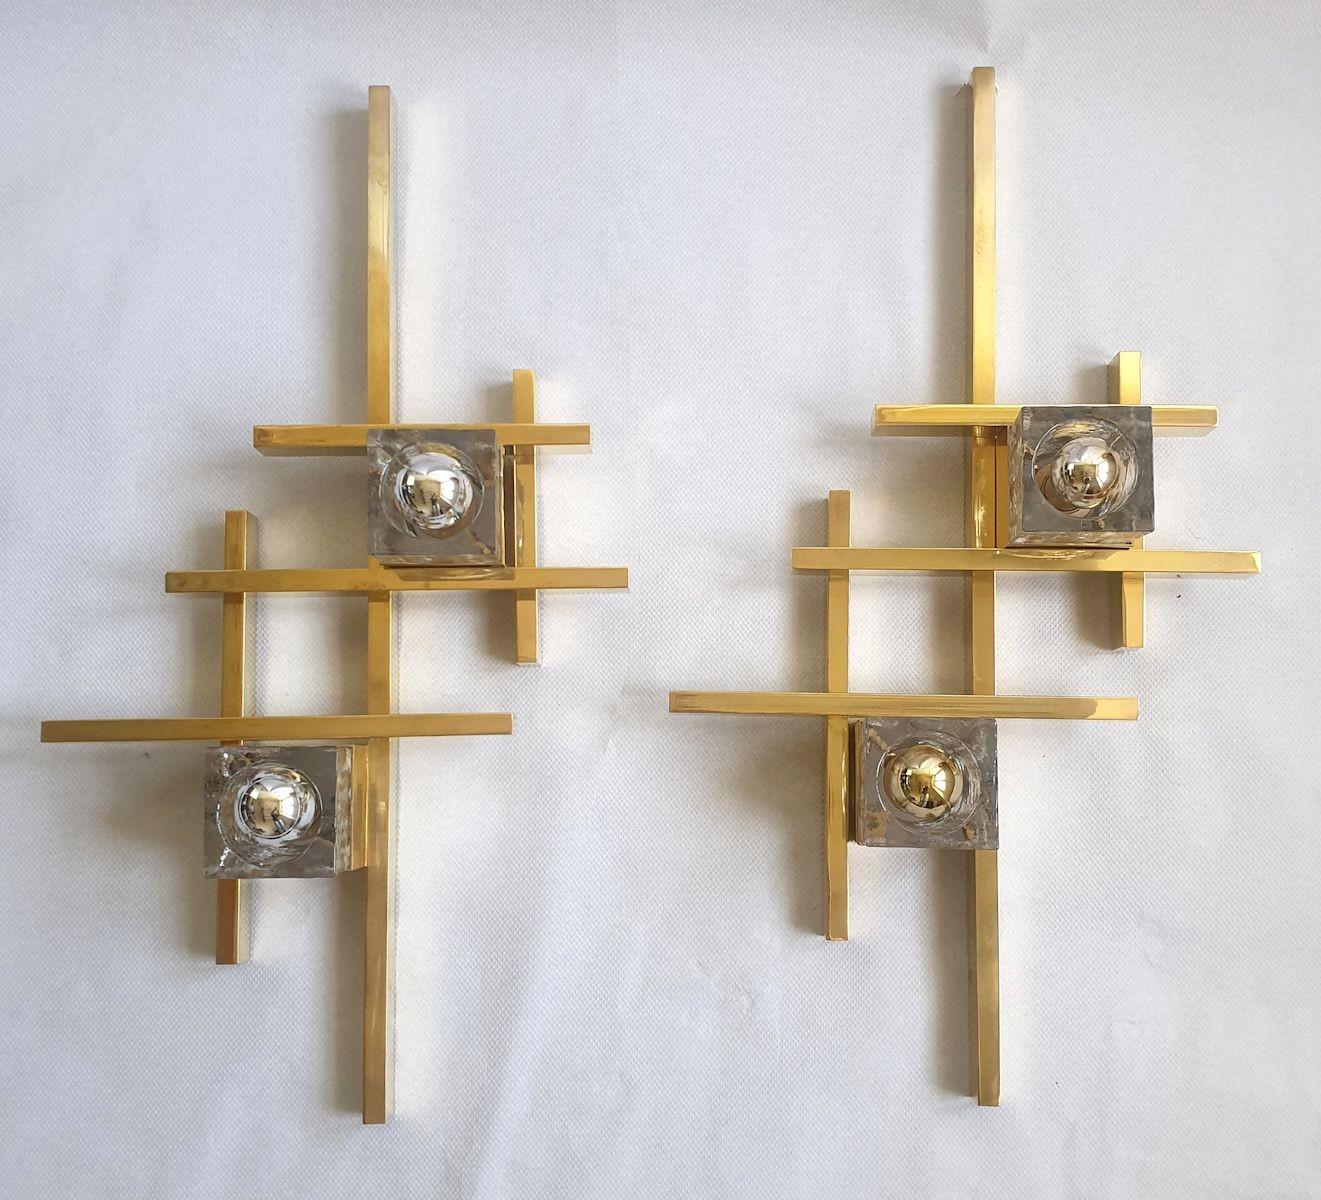 Pair of geometrical large sconces, attributed to Gaetano Sciolari, Italy circa 1970s.
The Mid-Century Modern pair of sconces are made of brass and two Murano clear square glasses, each nesting a light bulb.
The vintage pair has a geometrical